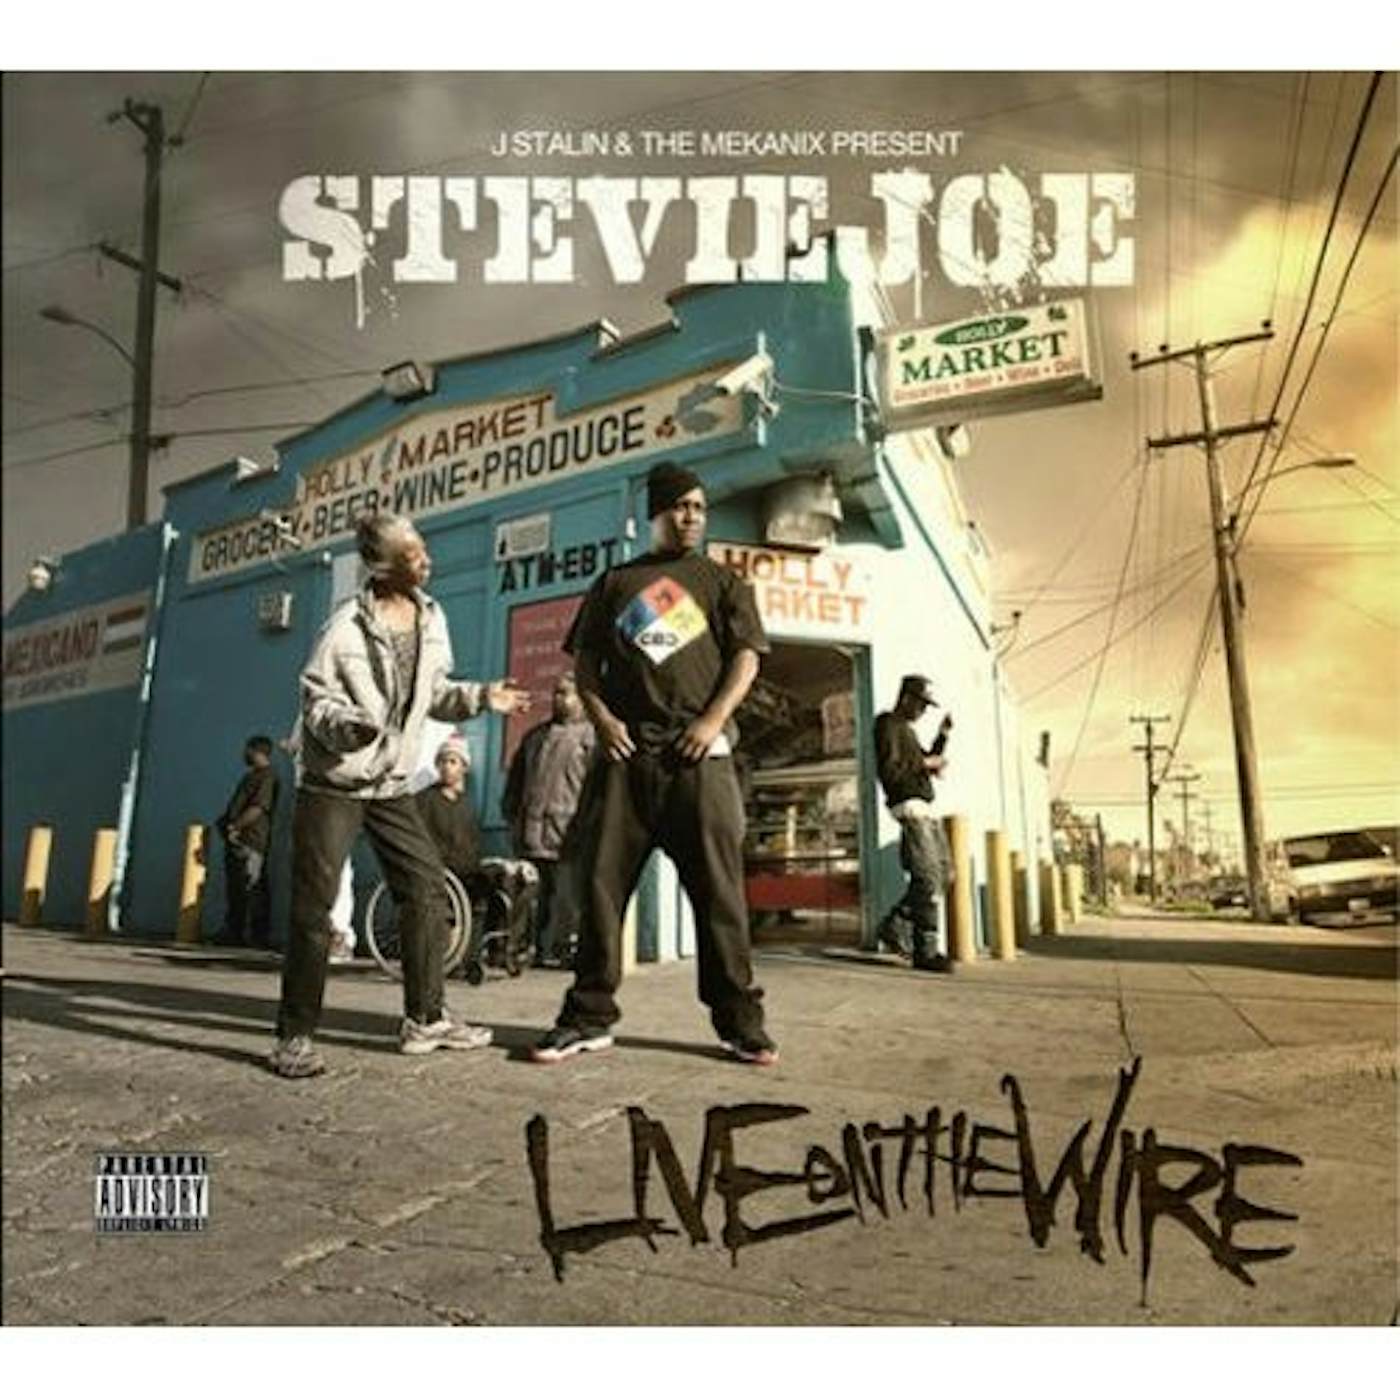 Stevie Joe LIVE ON THE WIRE CD